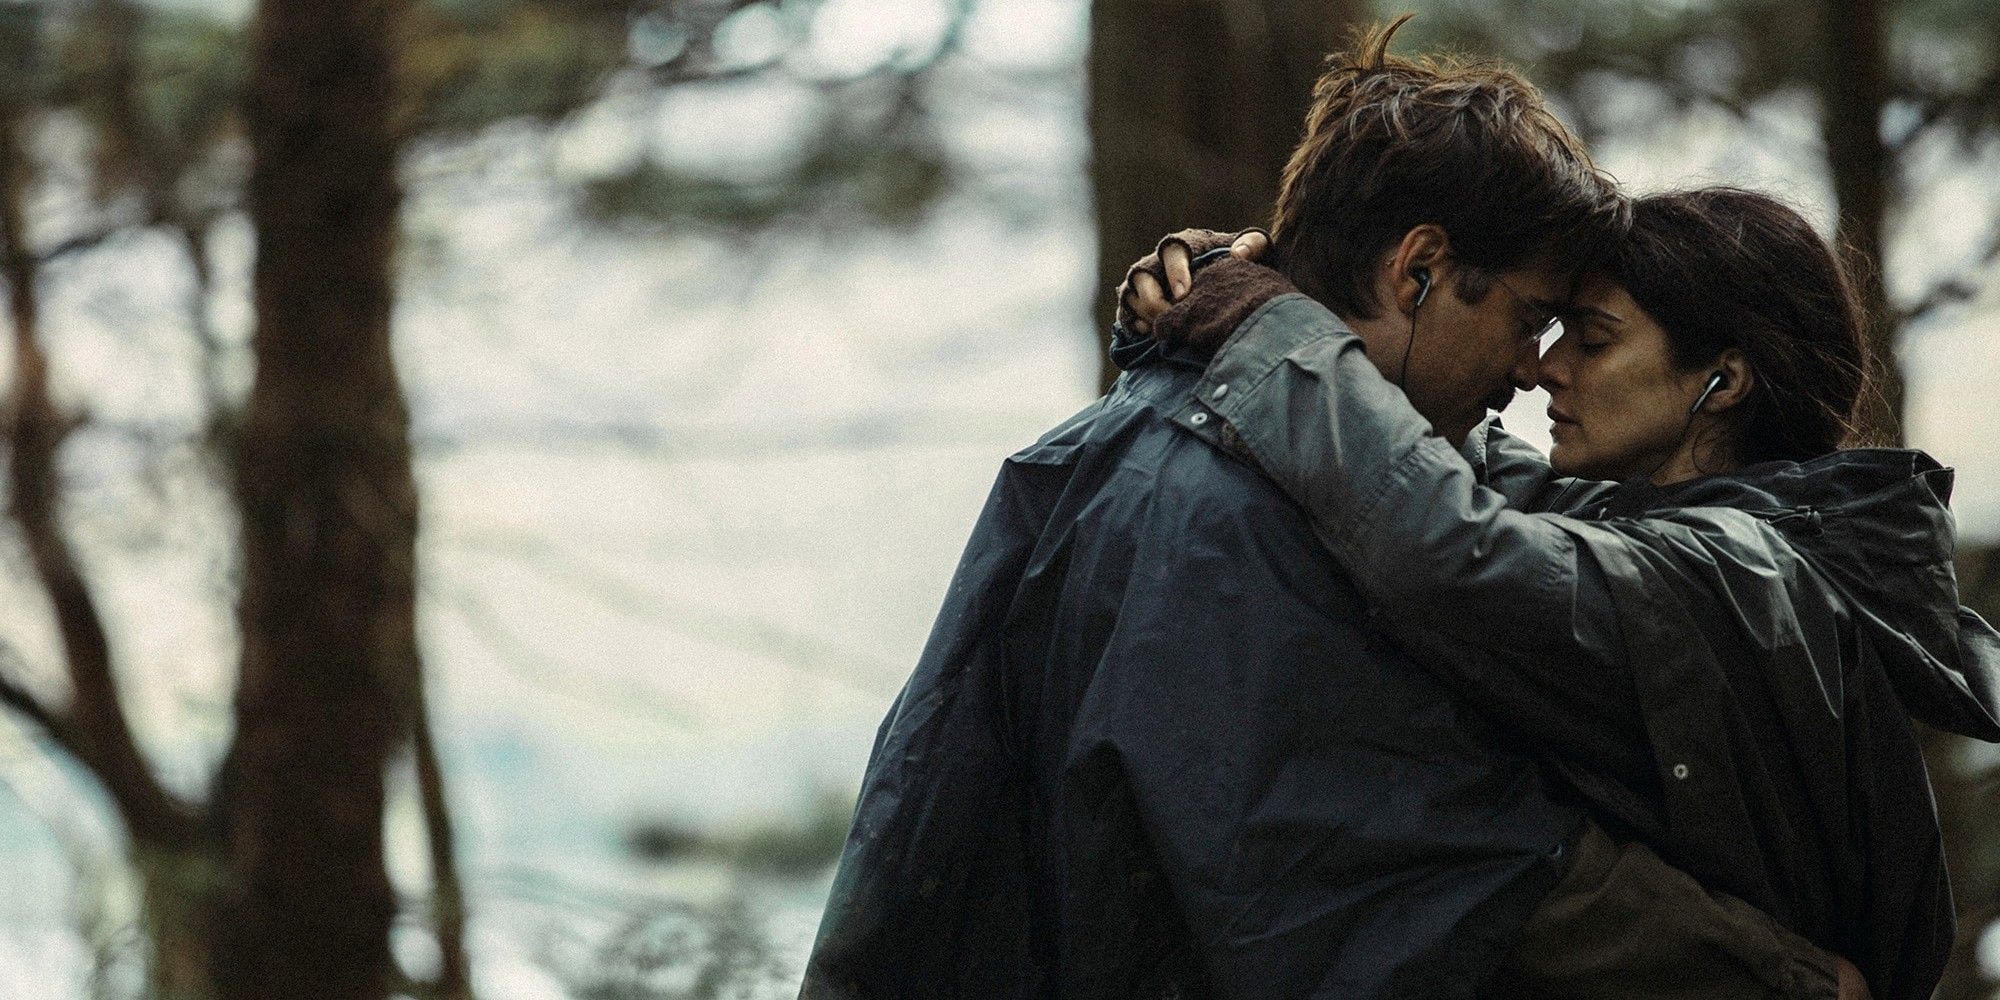 David (Colin Farrell) and the Short-Sighted Woman (Rachel Weisz) embracing in the forest in The Lobster